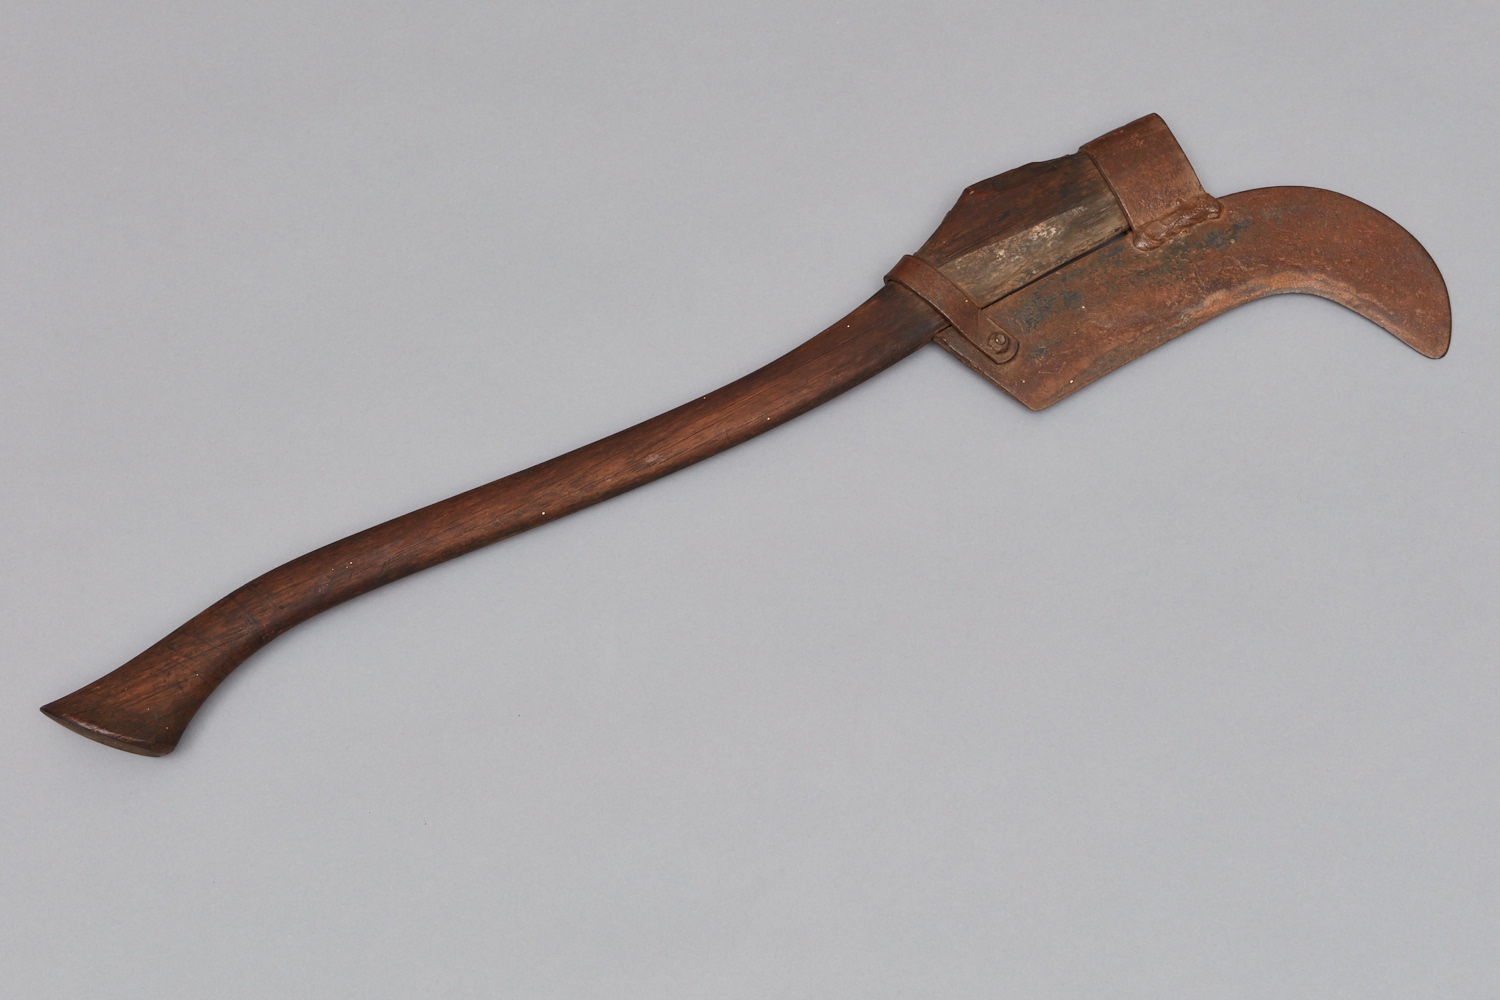 A wooden axe with a wooden handle.